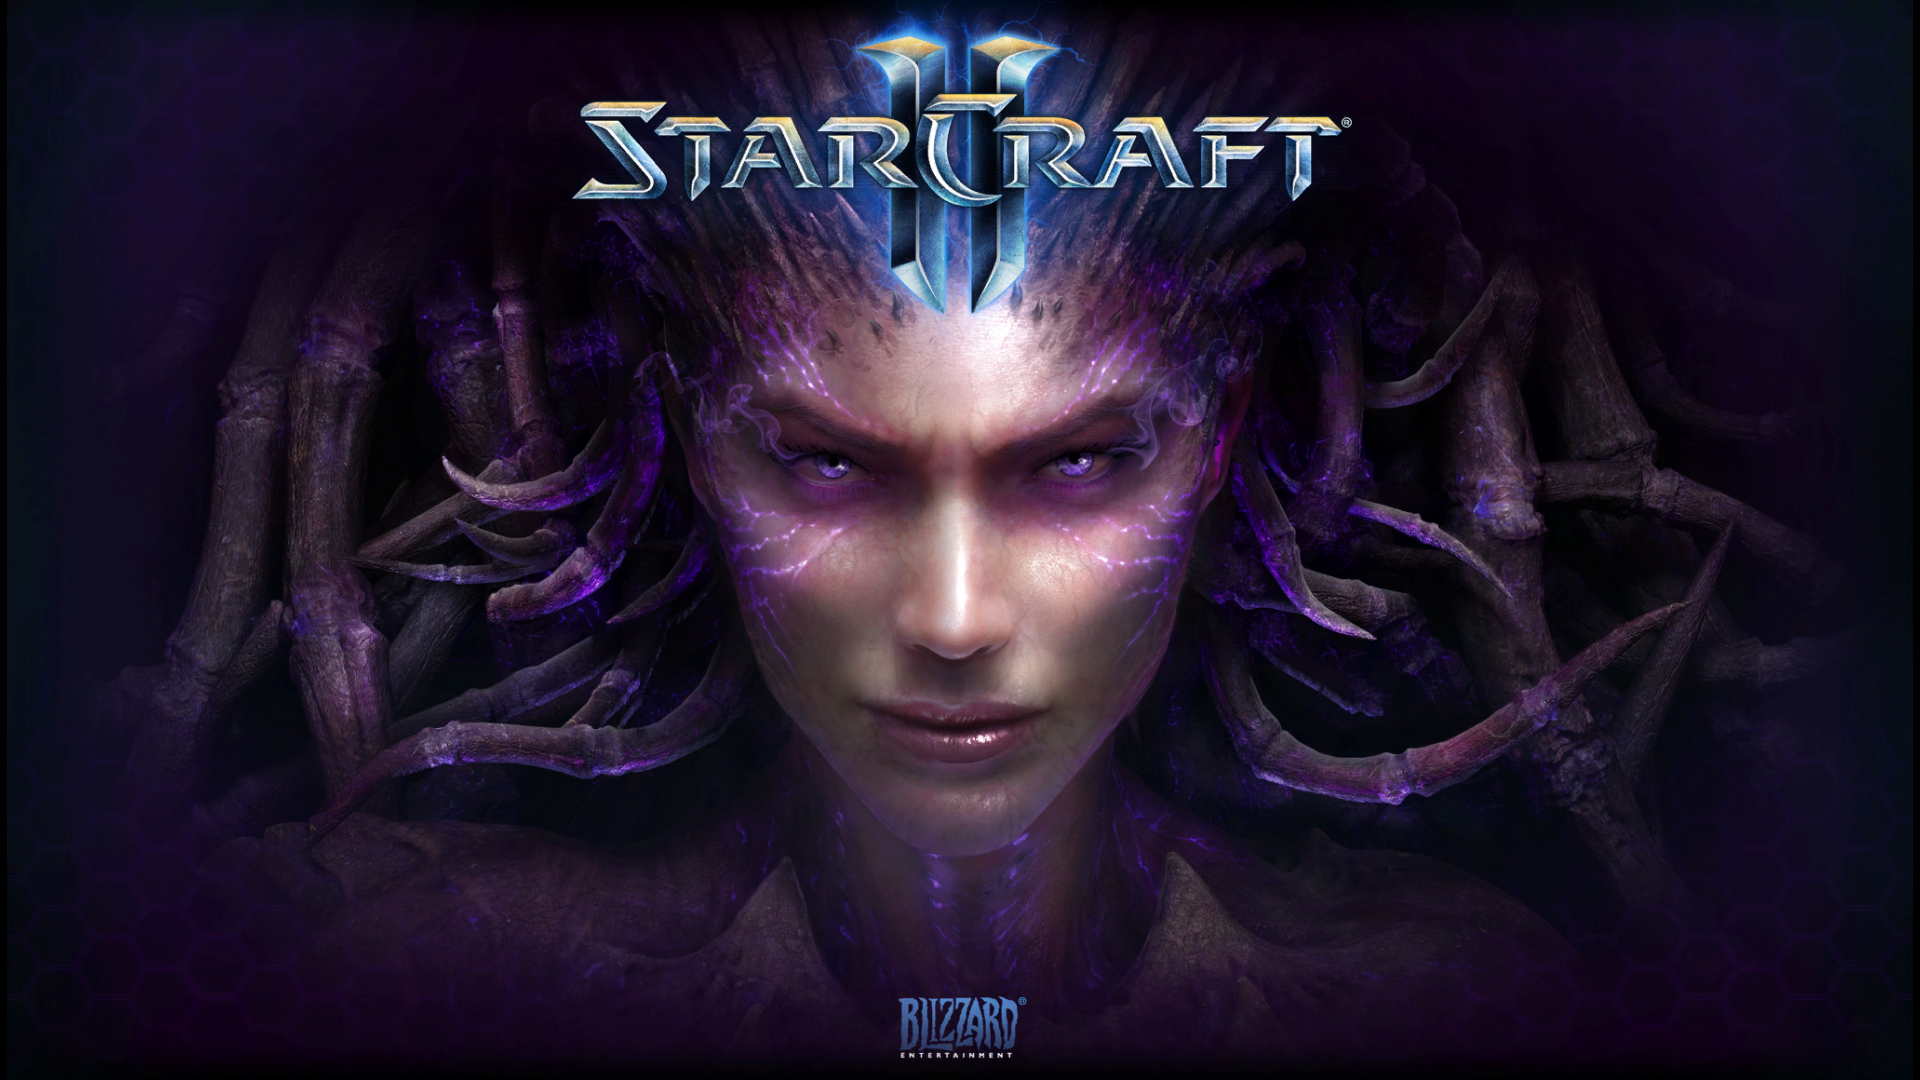 StarCraft II: Heart of the Swarm Single Player Campaign Transcript